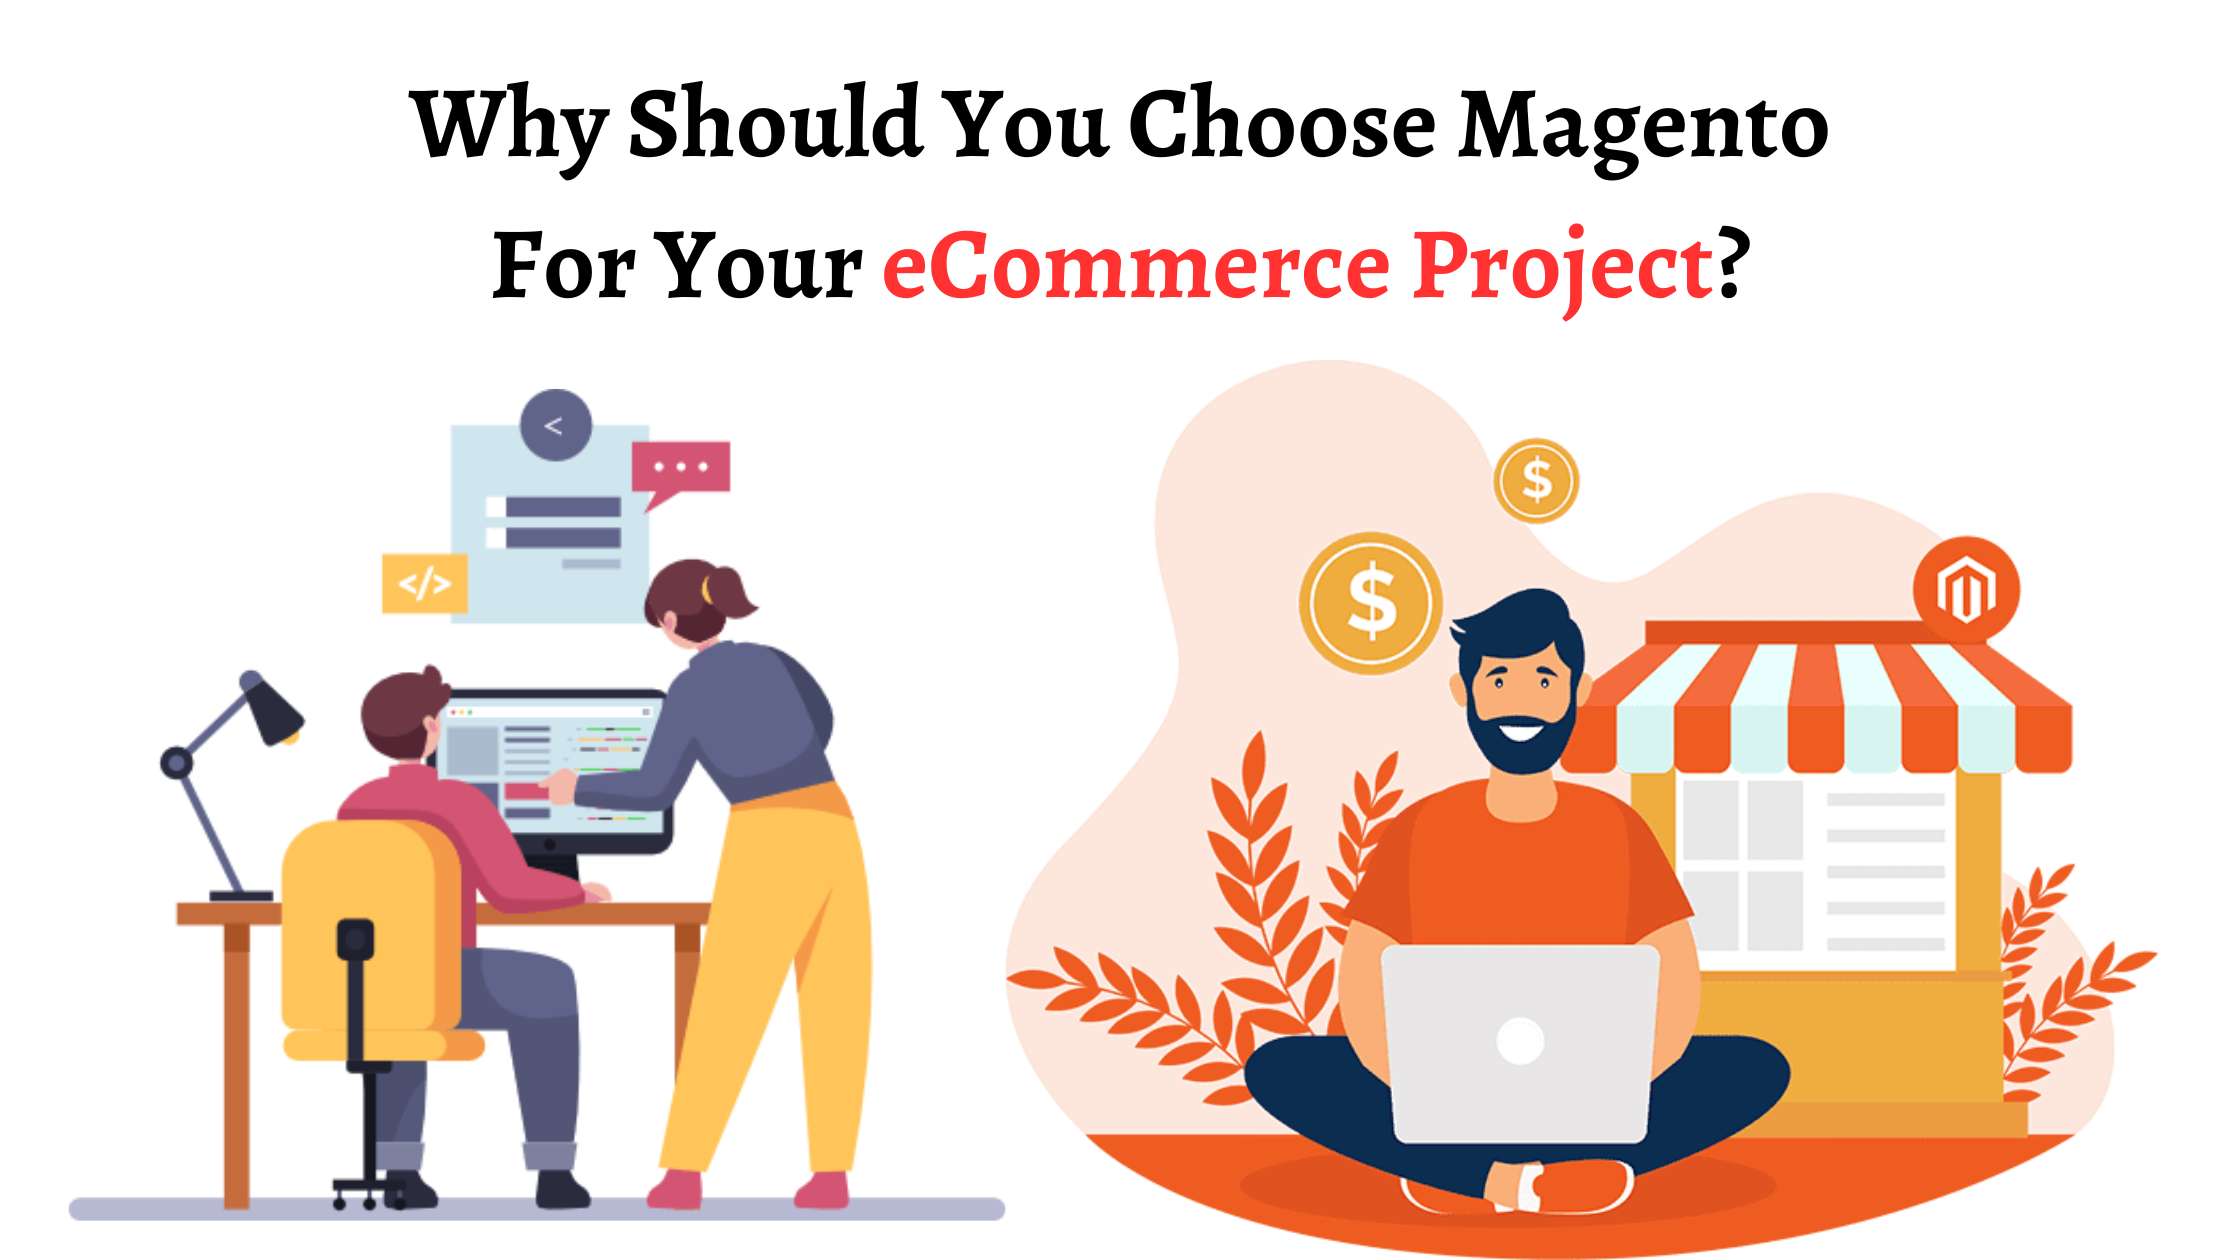 Why Should You Choose Magento For Your eCommerce Project